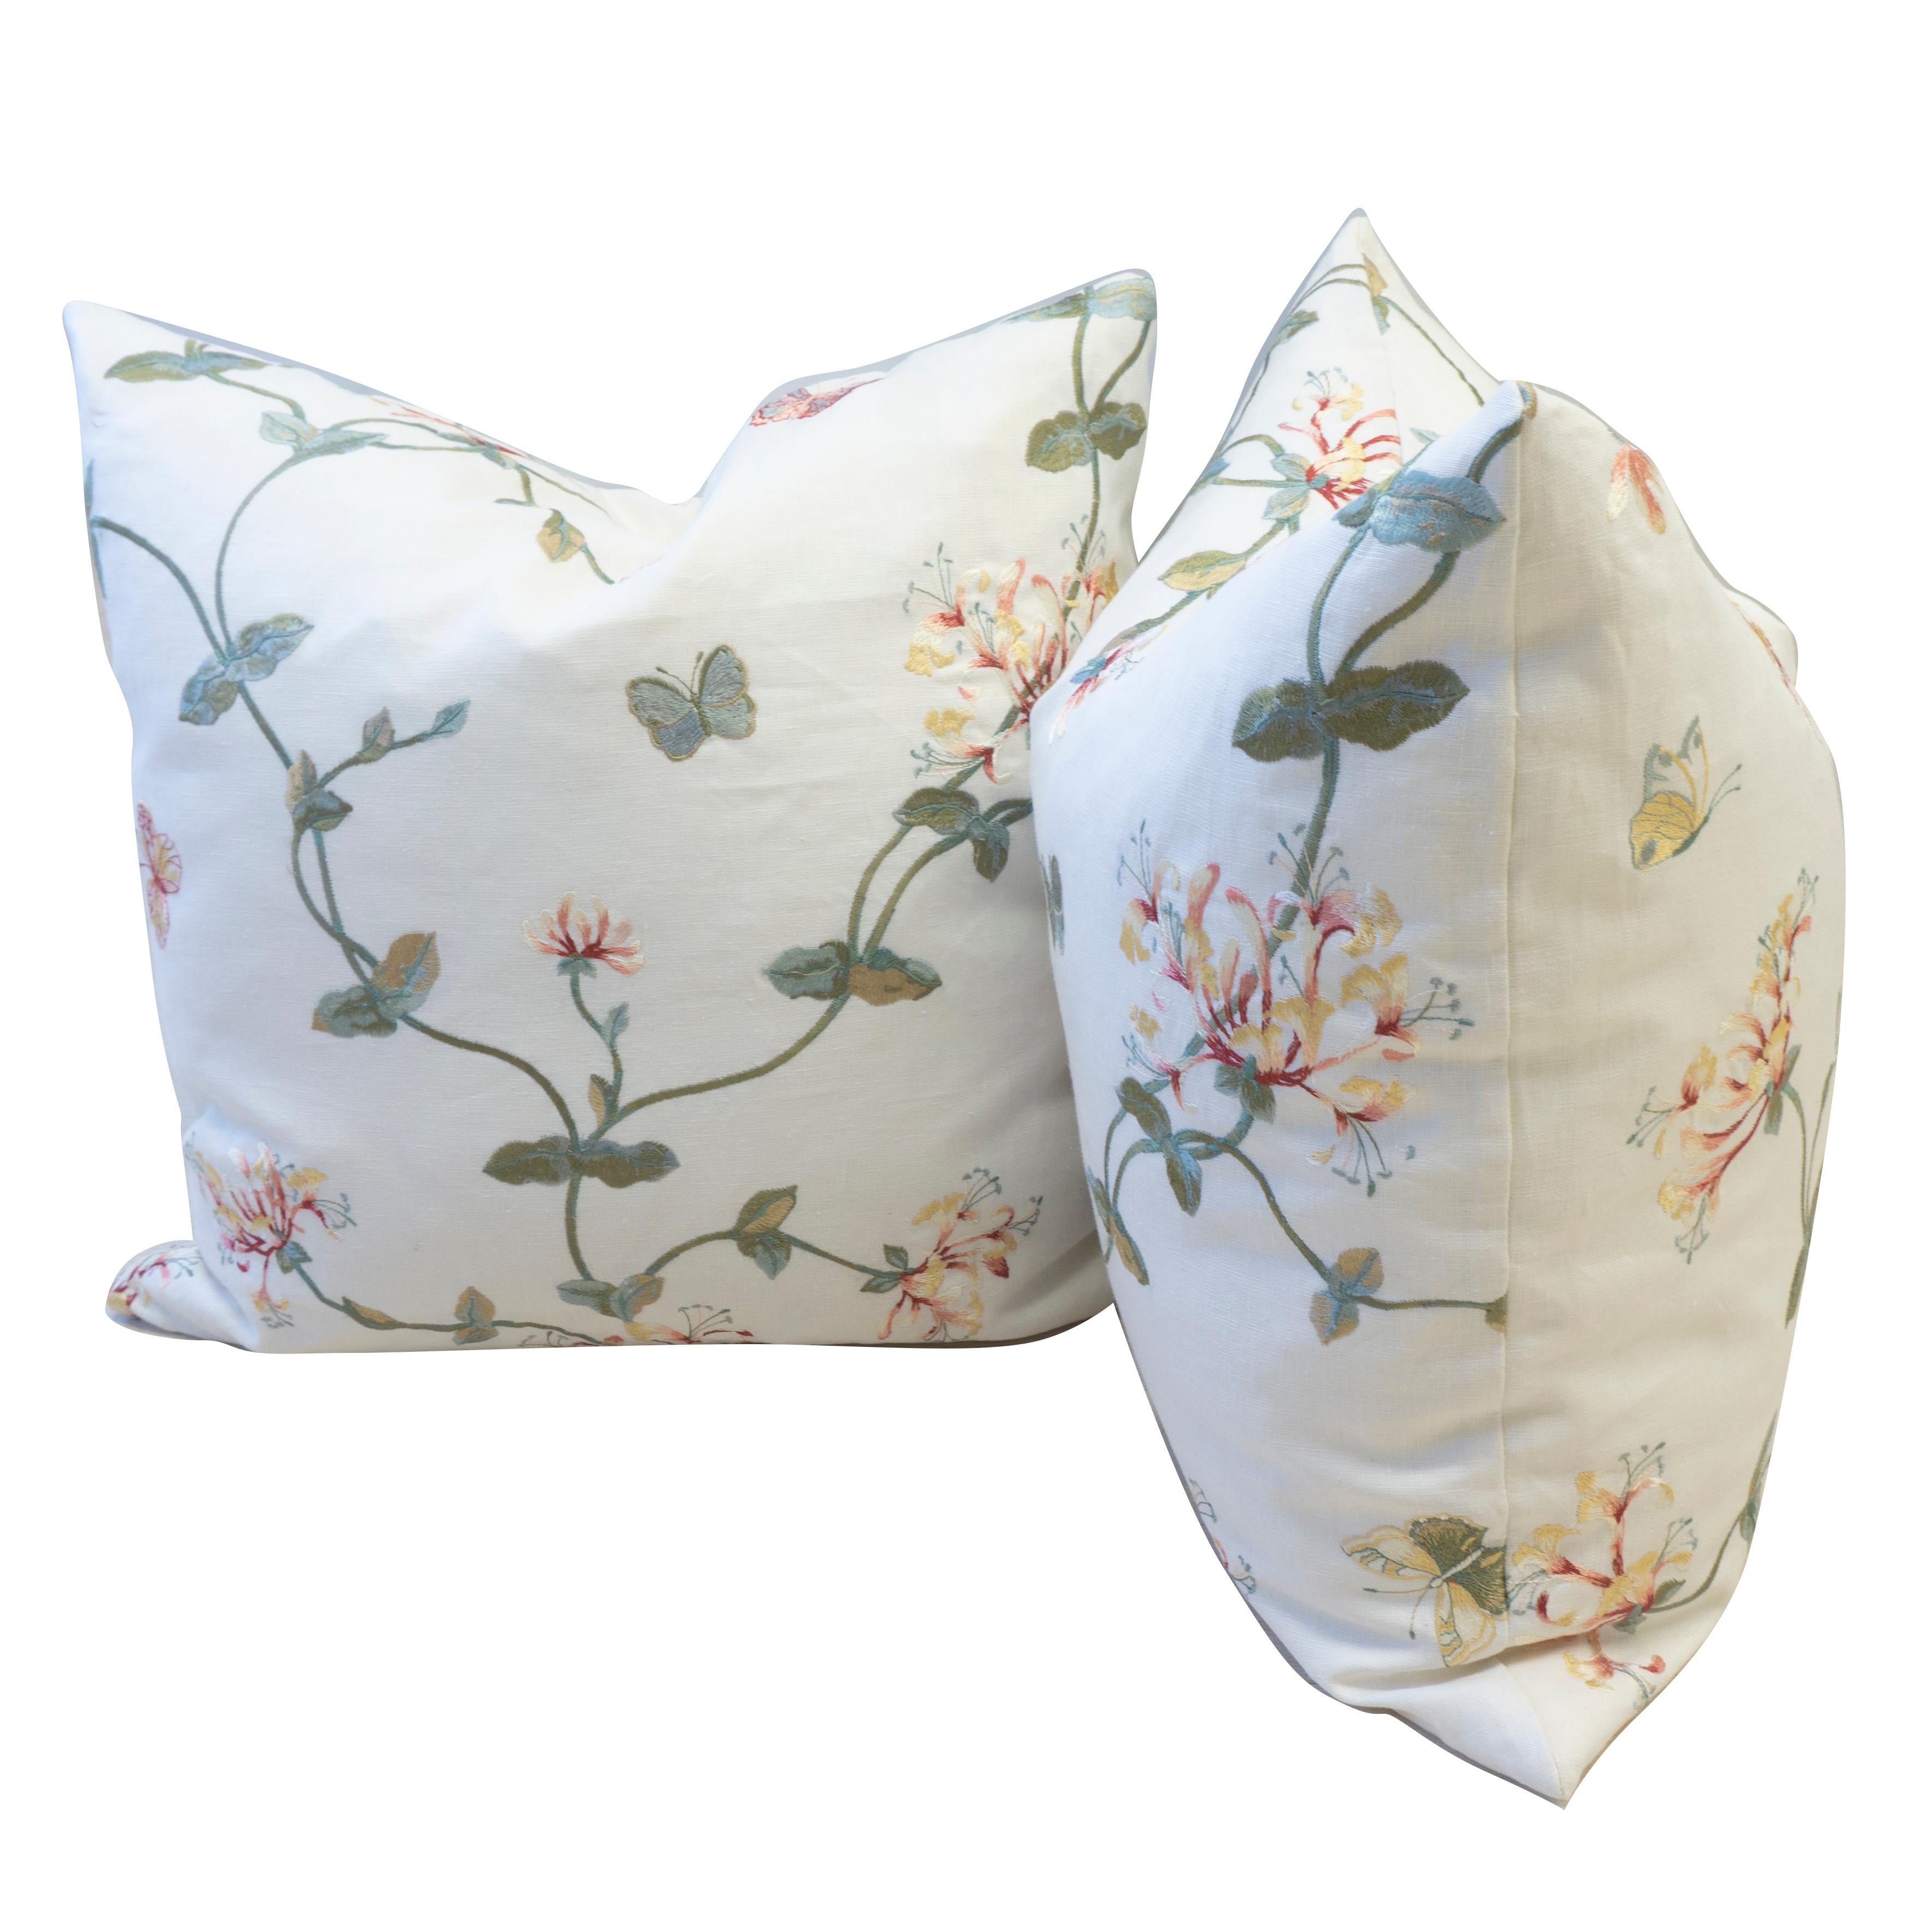 This pair of hand sewn throw pillows was made by us in our Norwalk, Connecticut studio. The pillows feature a delicate linen with embroidered flowers on a vine. 

Measurements: 20